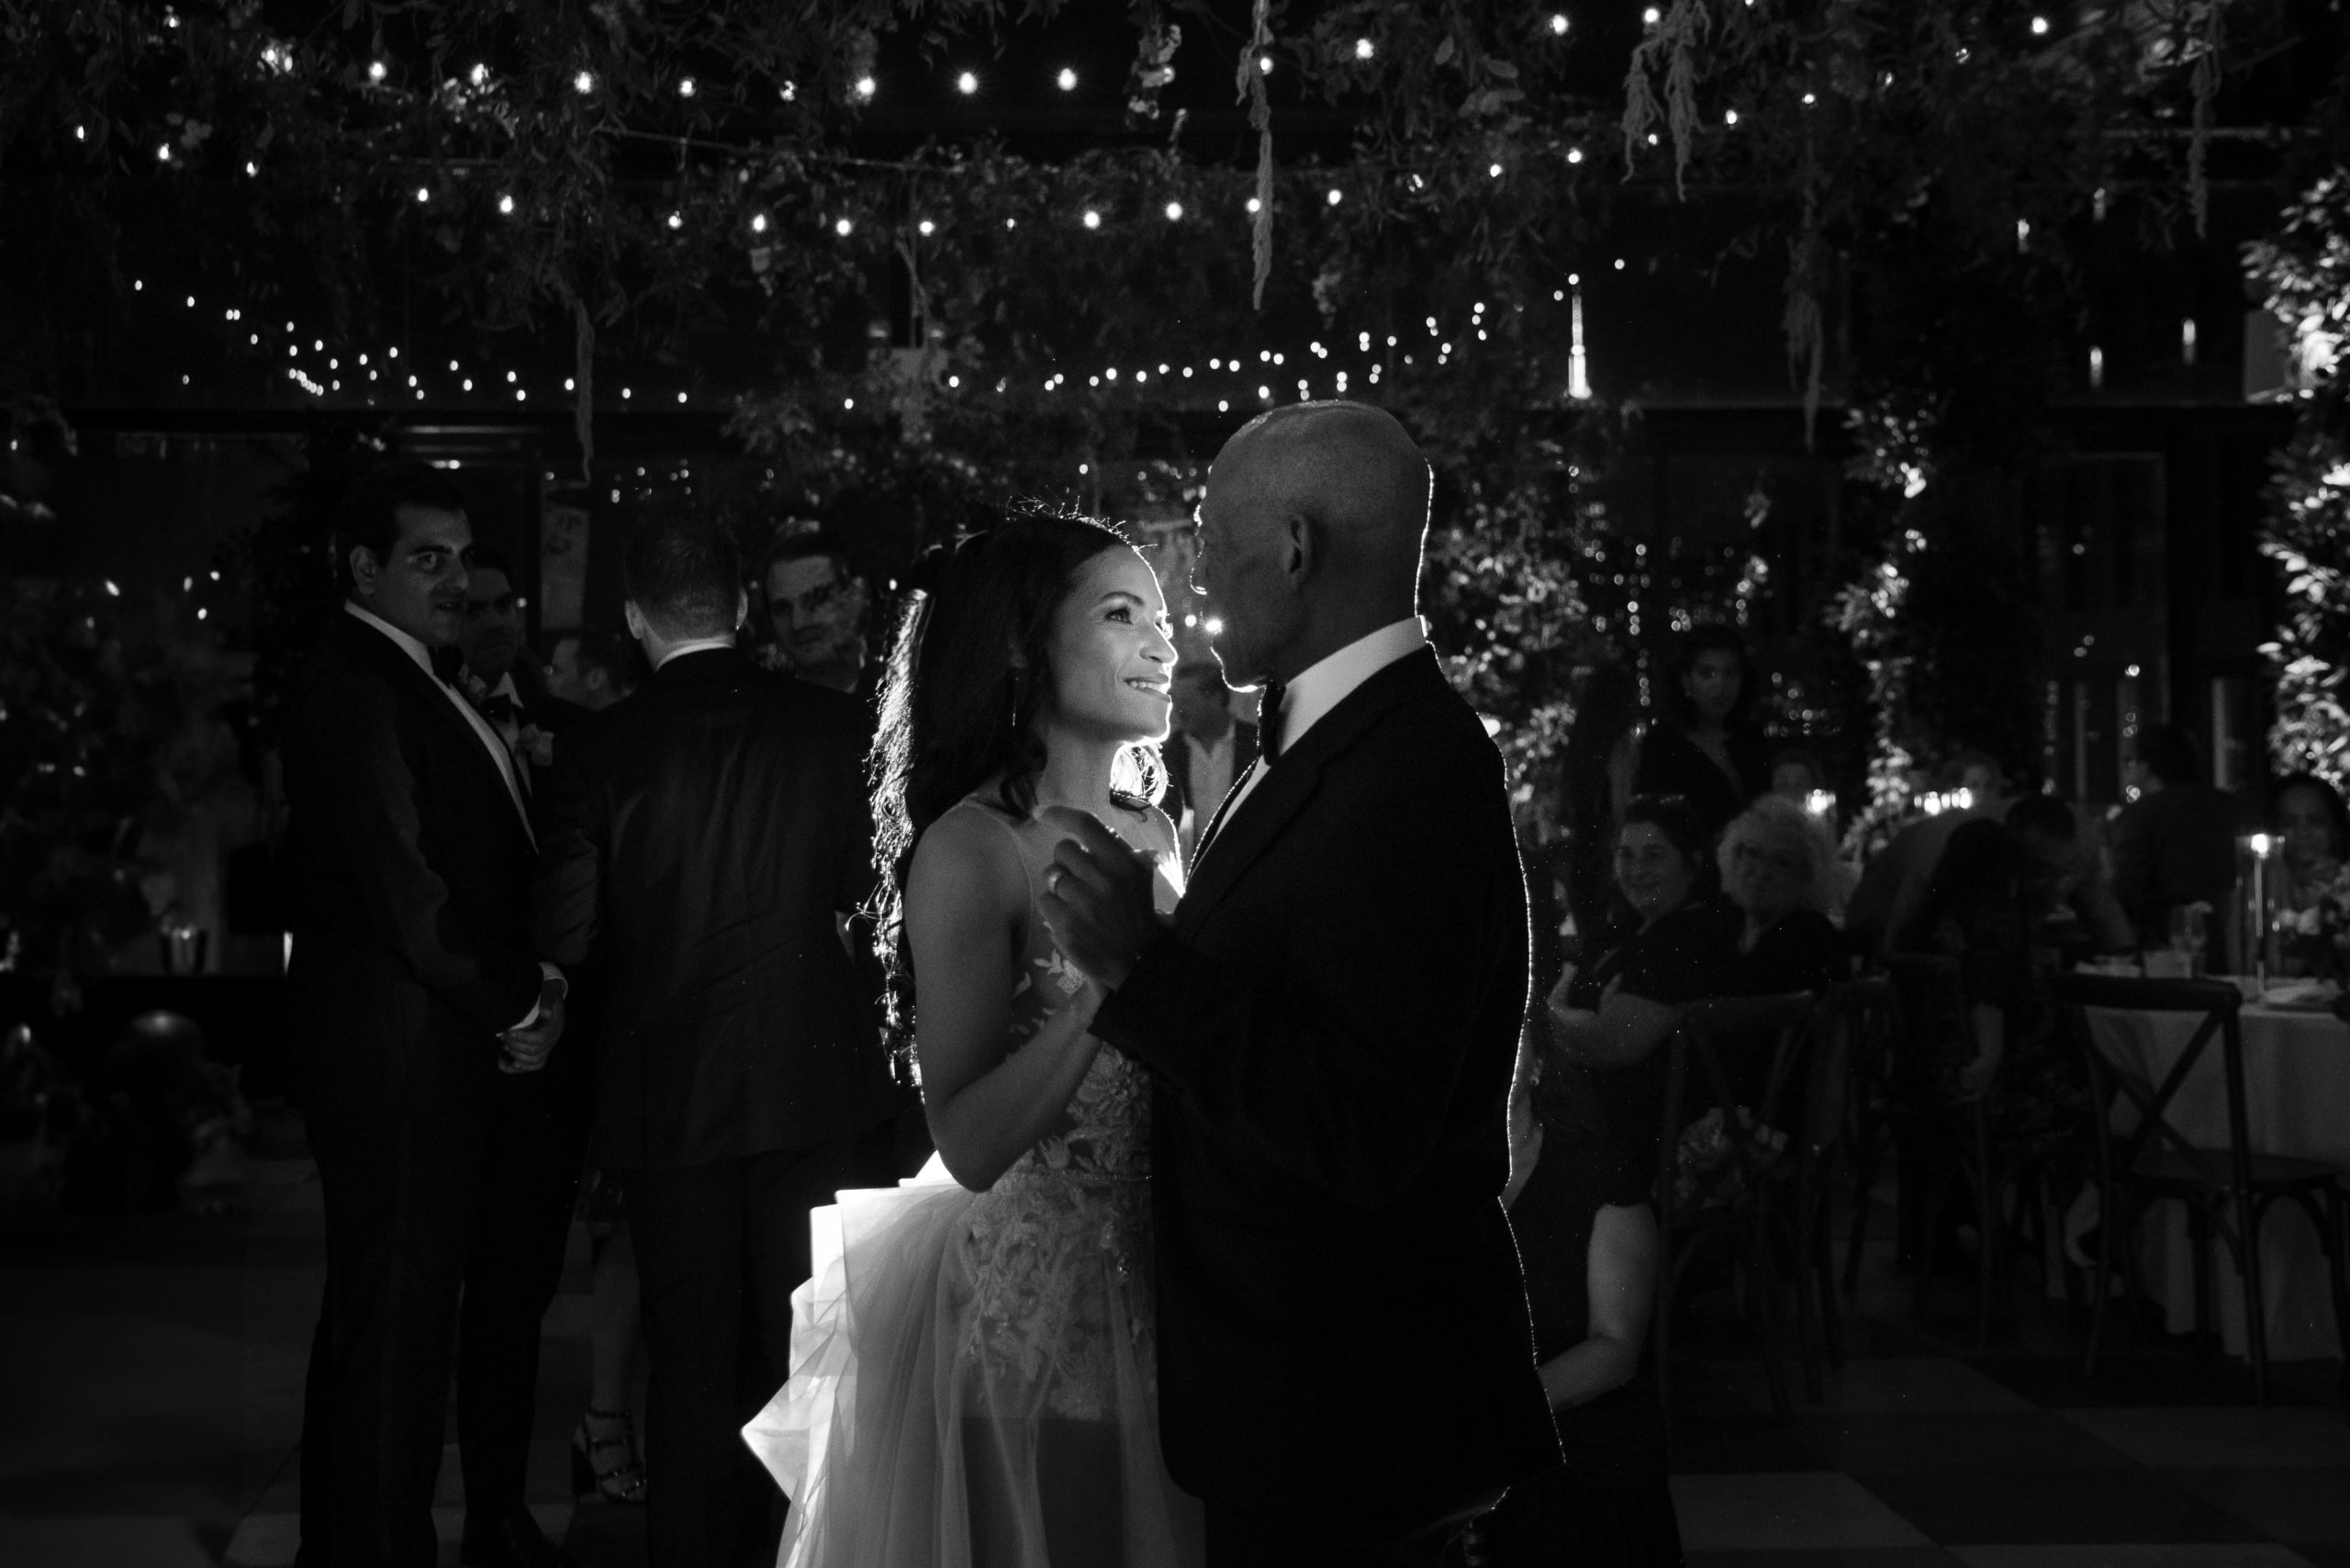 A bride and groom share their first dance at a wedding in New York.